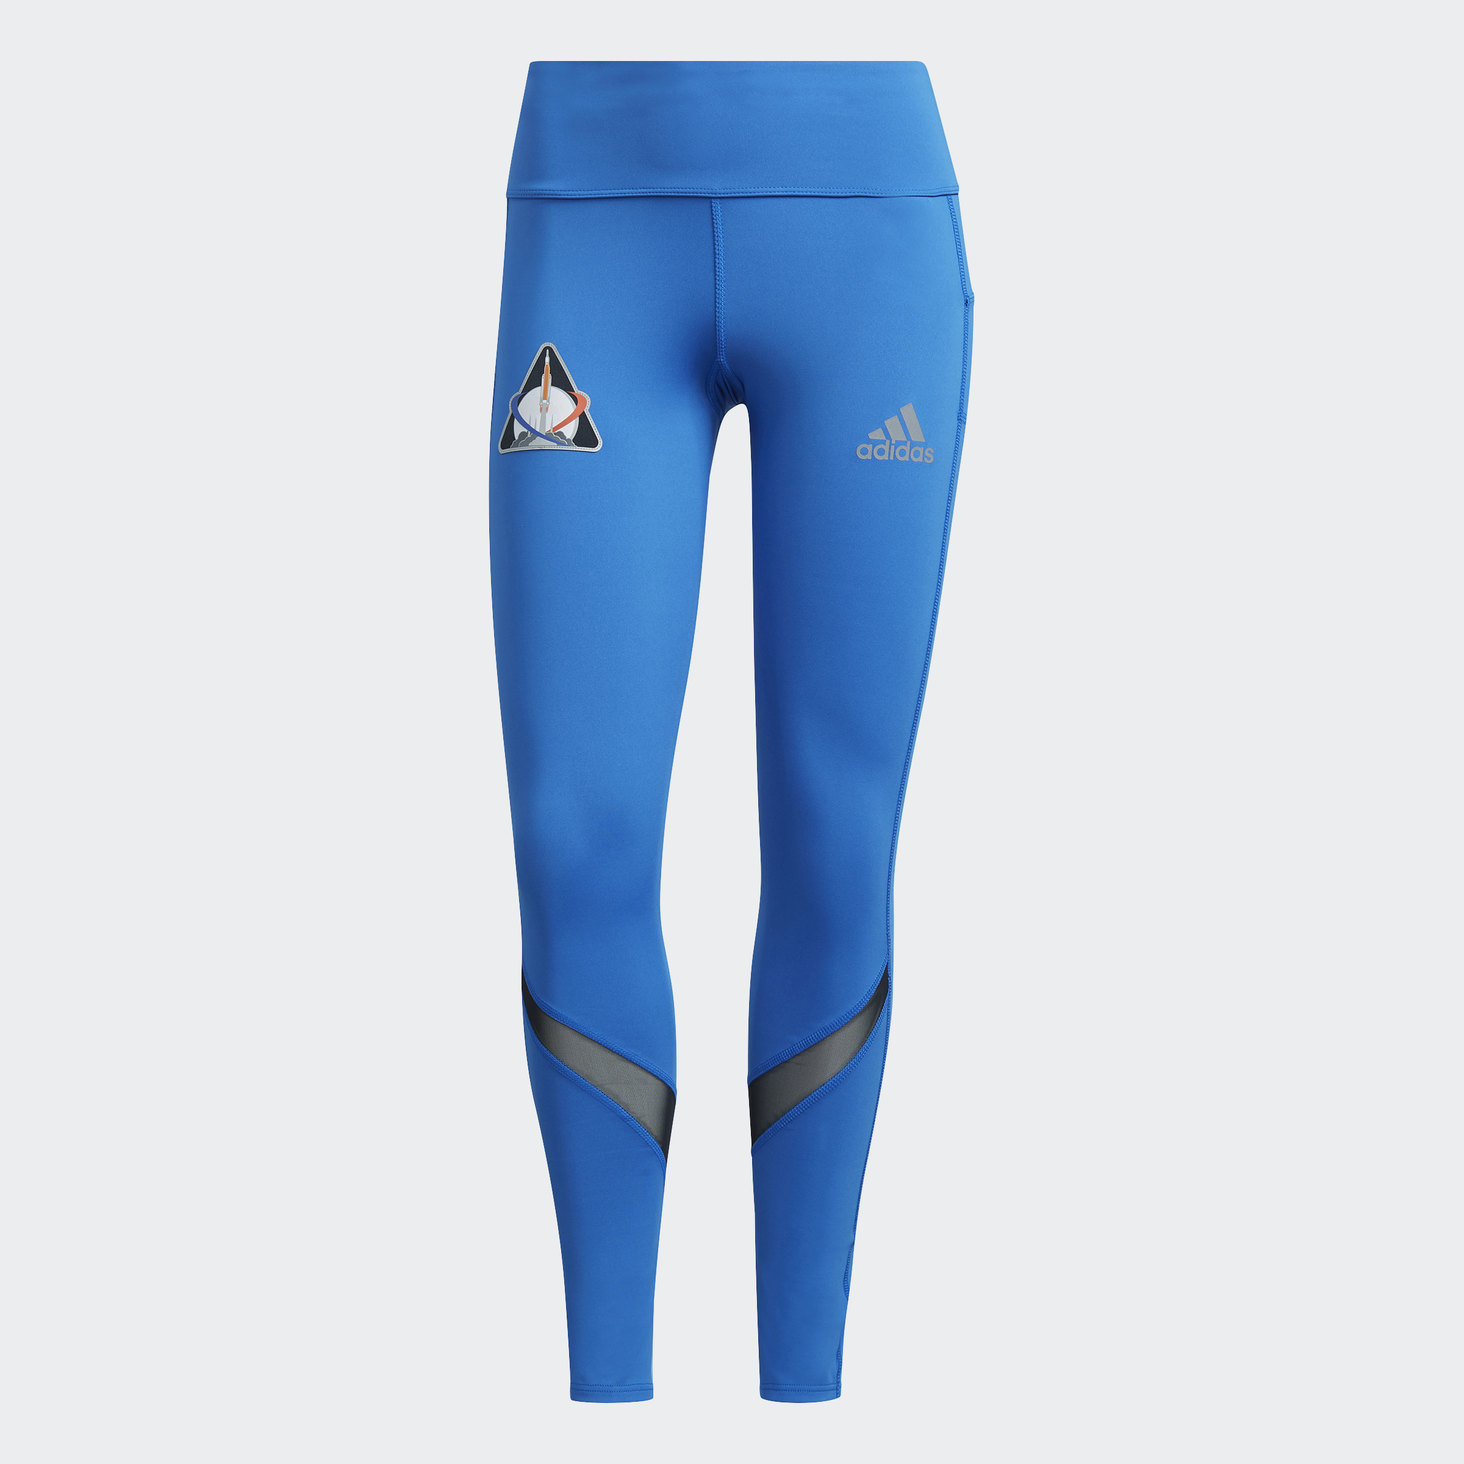 Adidas Women's Leggings Size Guide  International Society of Precision  Agriculture